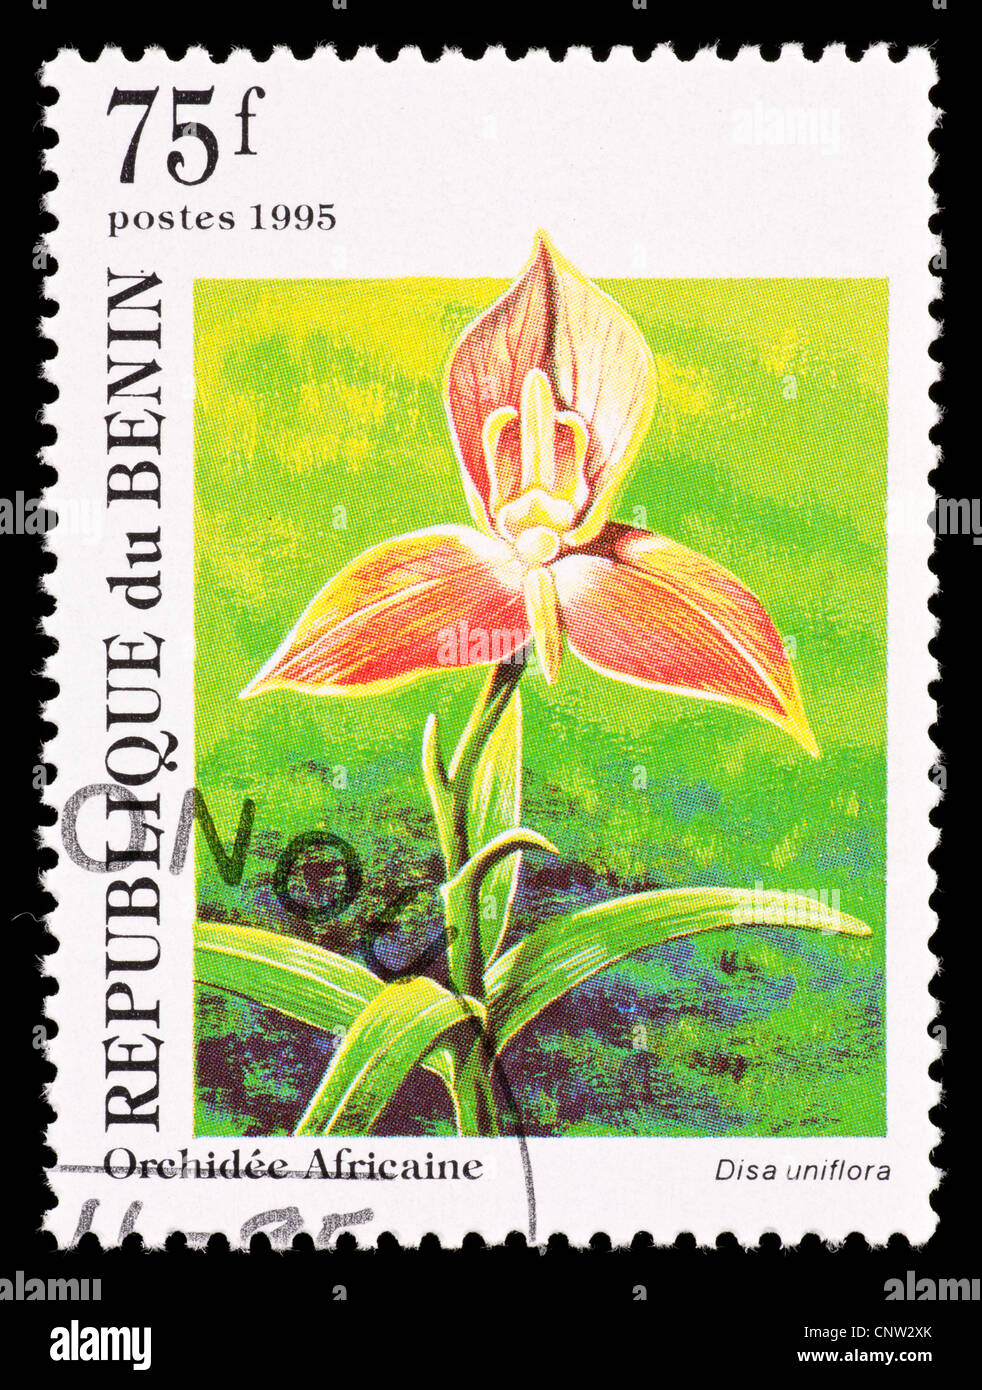 Postage stamp from Benin depicting an orchid (Disa uniflora) Stock Photo